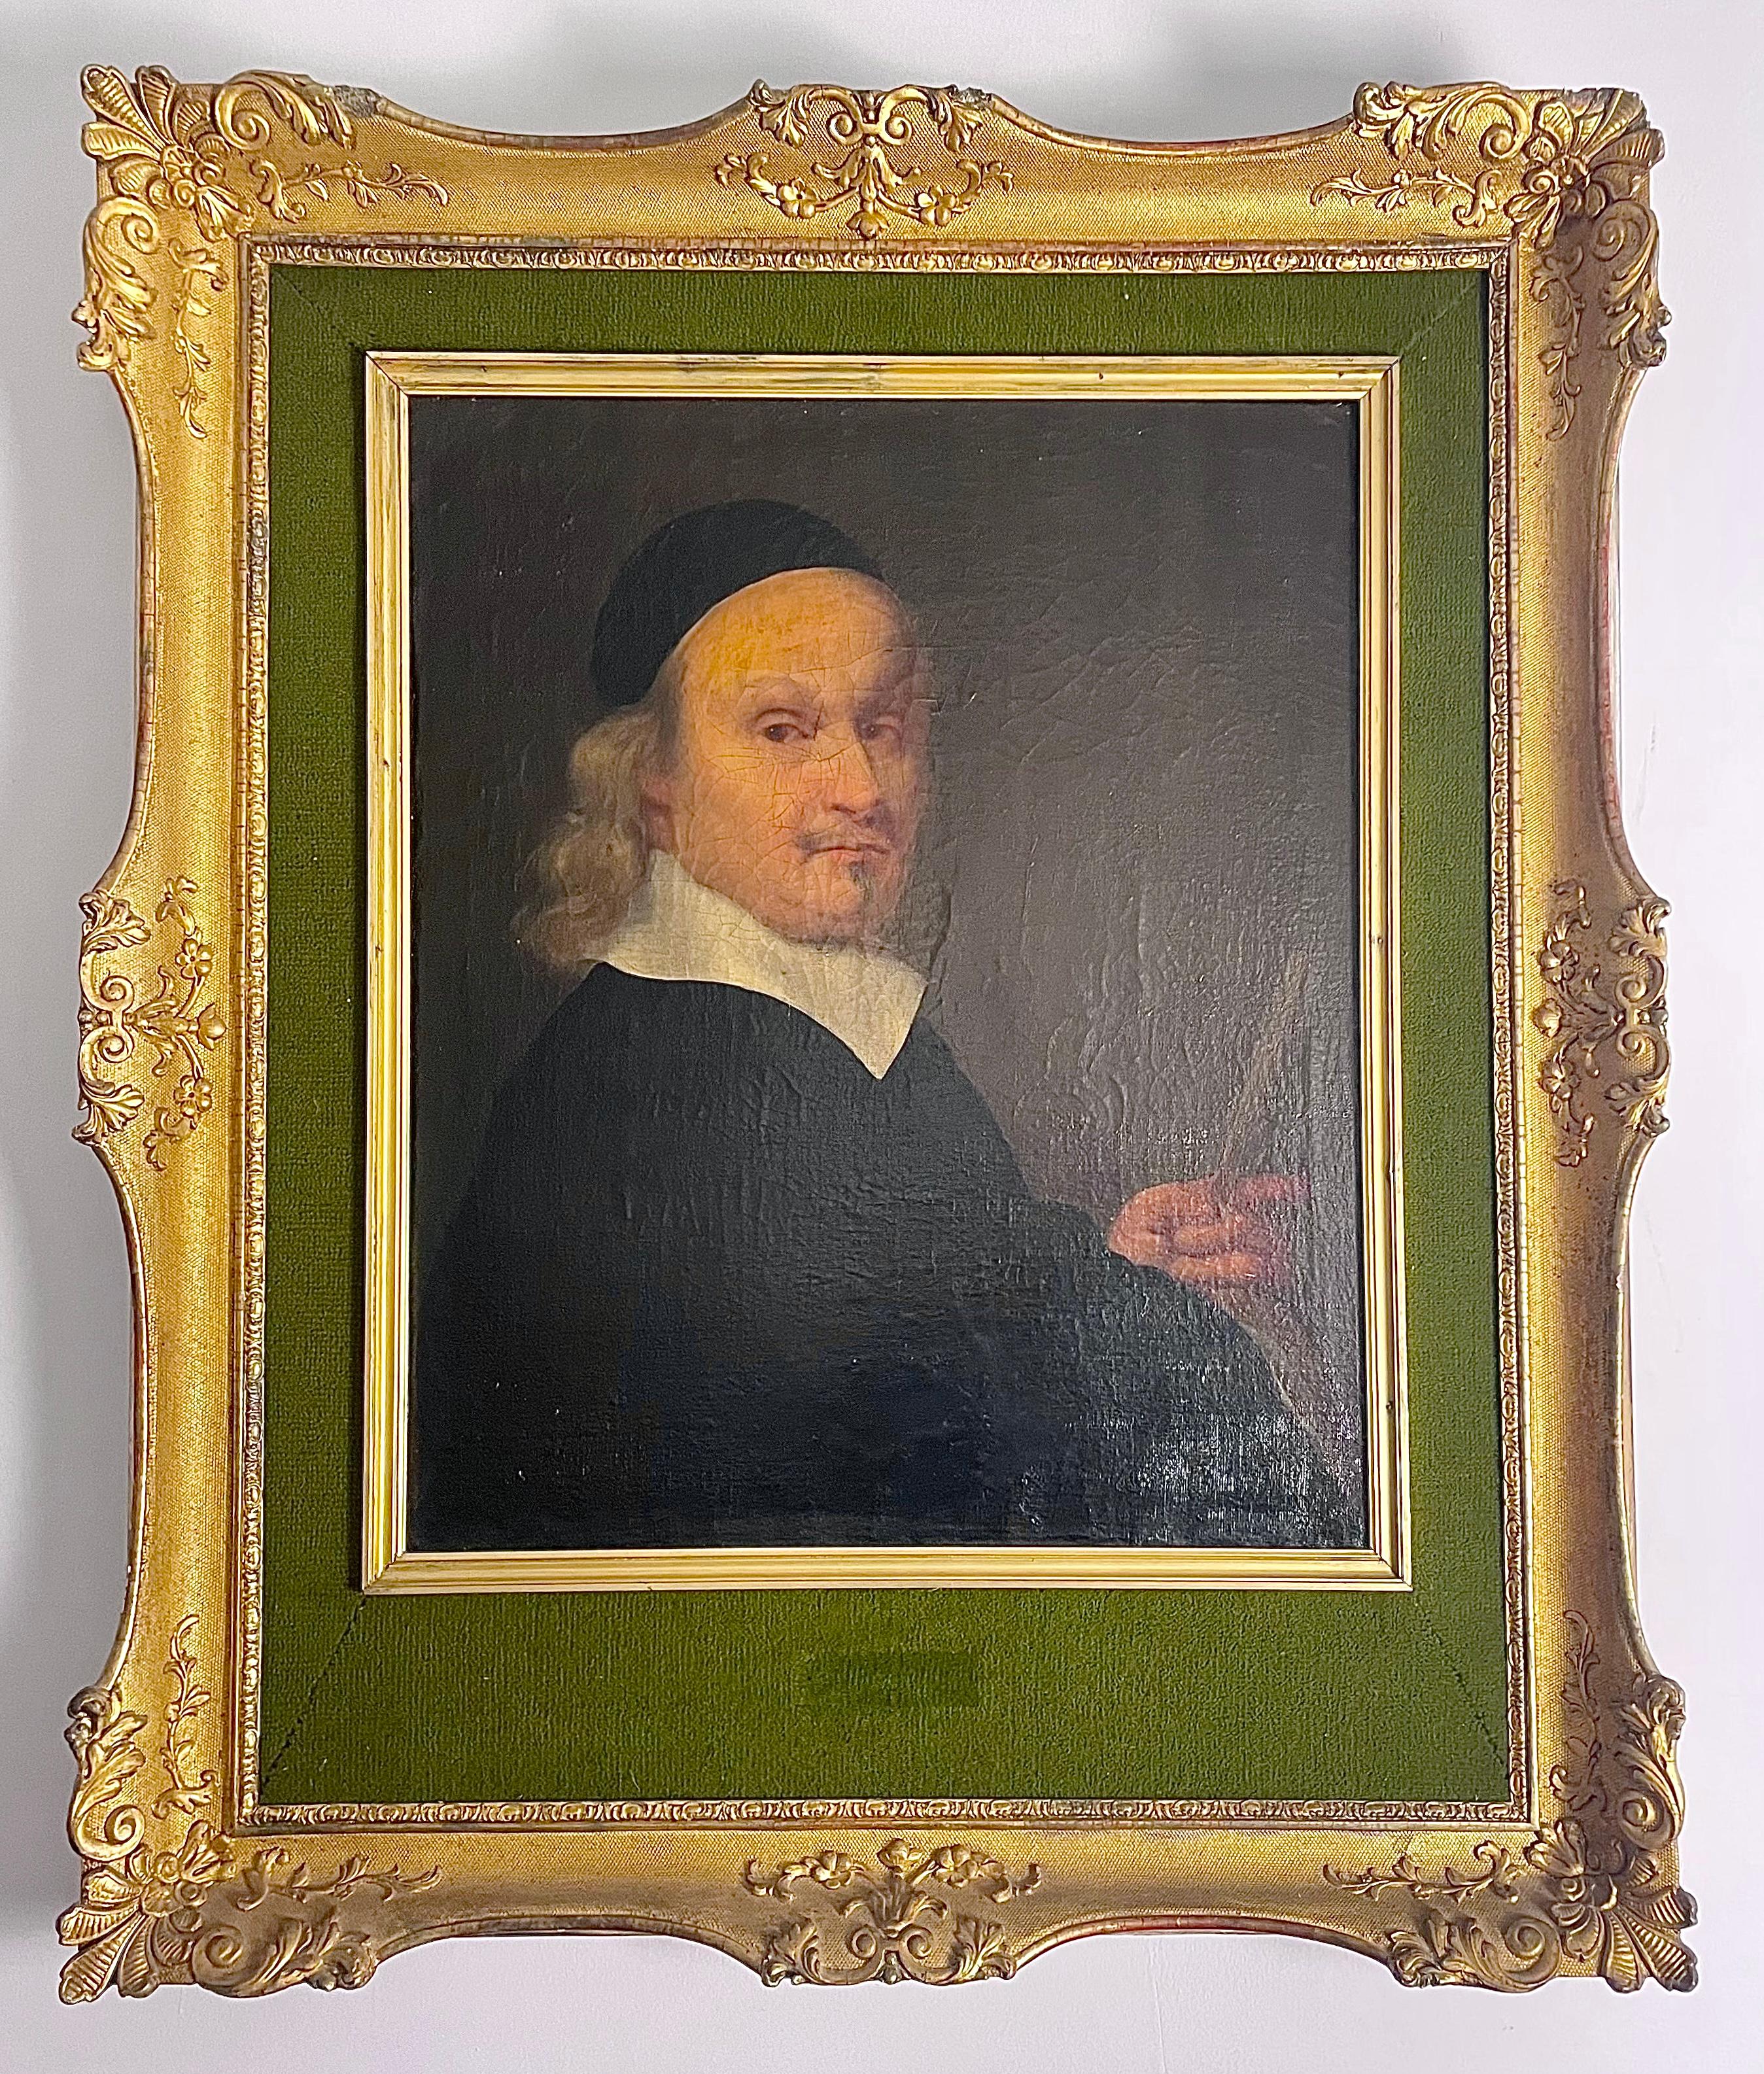 Large, very well done oil on canvas representing the Portrait of a mathematician, a professor, leaning on his elbows and holding a ruler.

This painting has a very beautiful frame, with a large gilded and worked frame. The mat is in green velvet